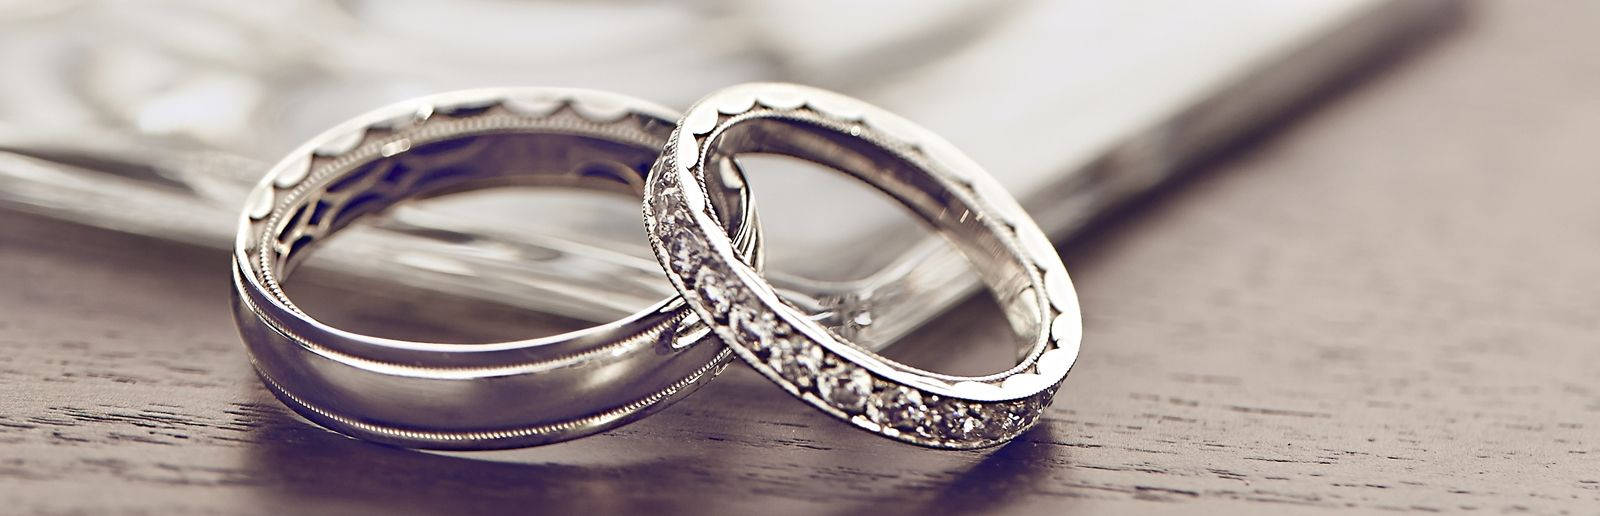 1600X516 Wedding Rings Wallpaper and Background